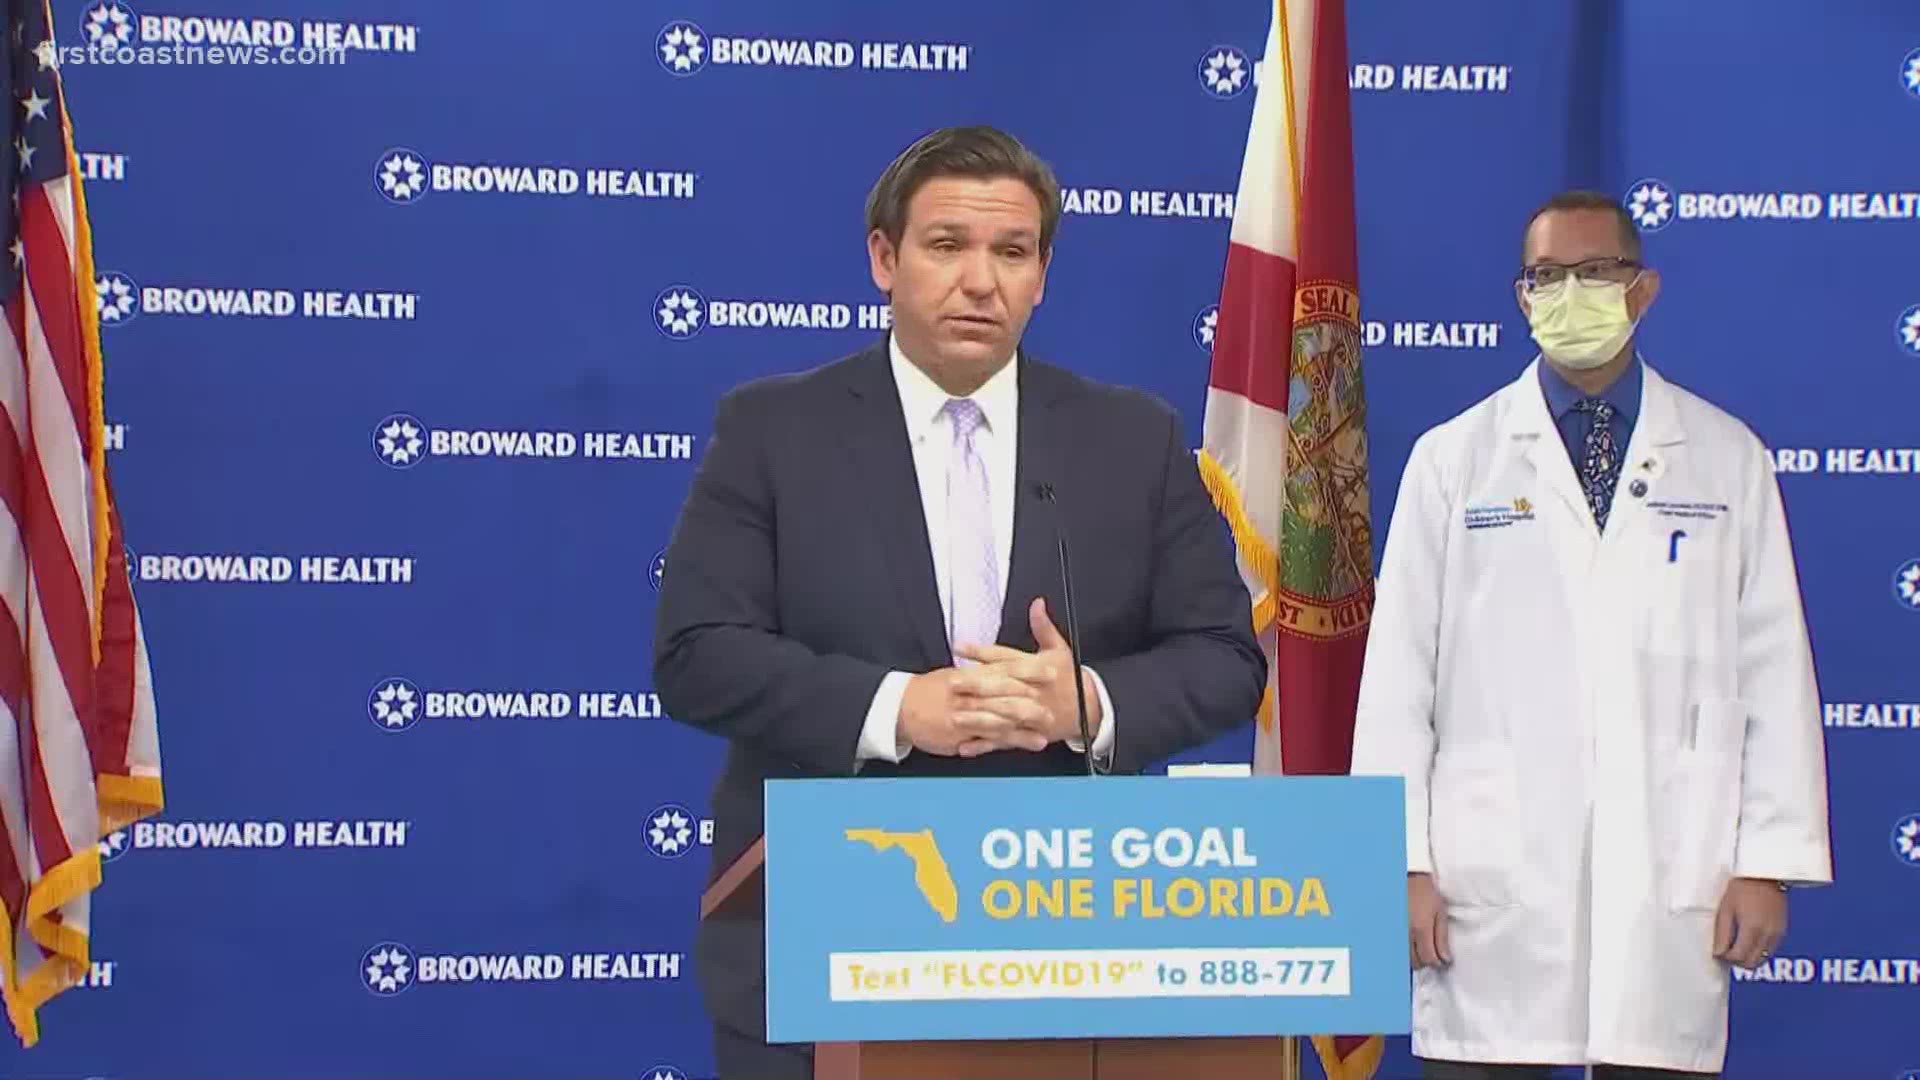 Florida Gov. Ron DeSantis gave COVID-19 update during a news conference Aug. 3, 2020 at Broward Health in Ft. Lauderdale. He announced changes at testing sites.